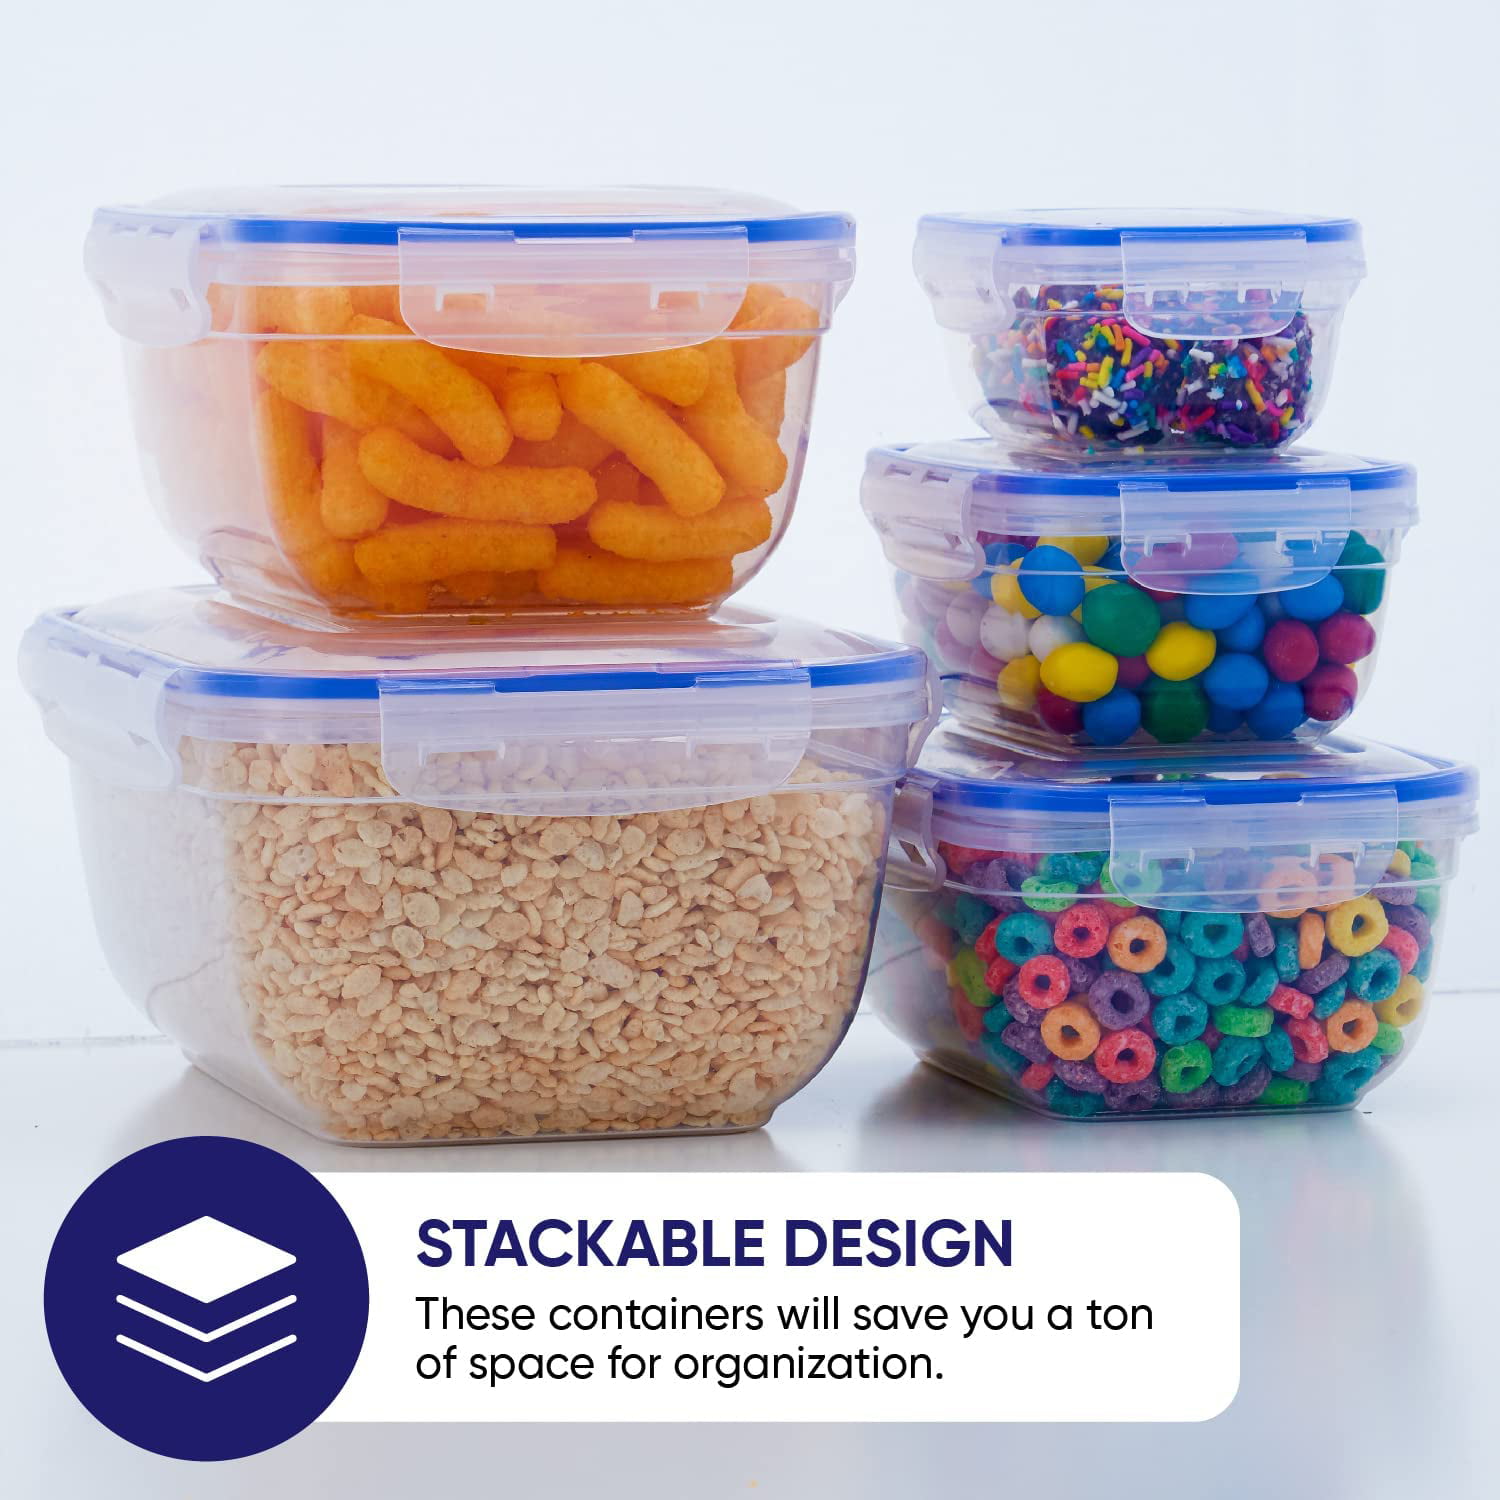 Superio Brand Multisize Plastic BPA-Free Reusable Food Storage Container  Set with Lid in the Food Storage Containers department at